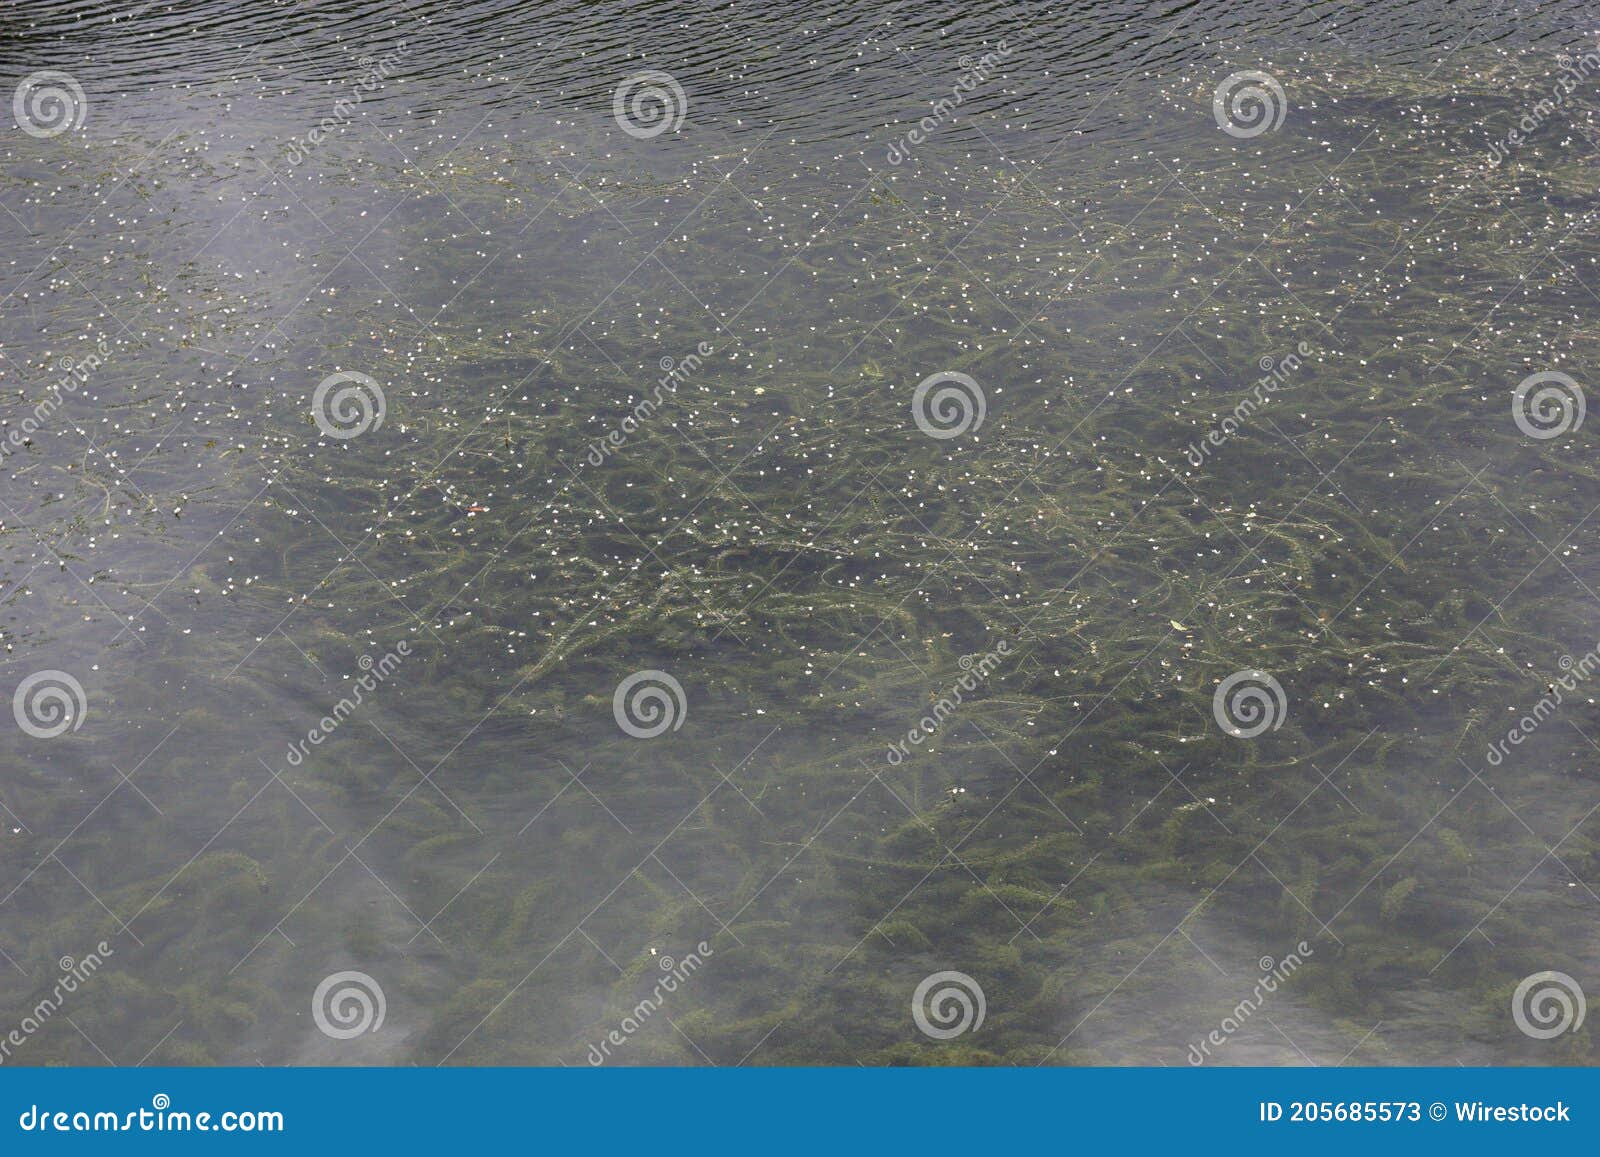 calm transparent water surface with seaweed algae beneath in sao miguel island, acores, portugal